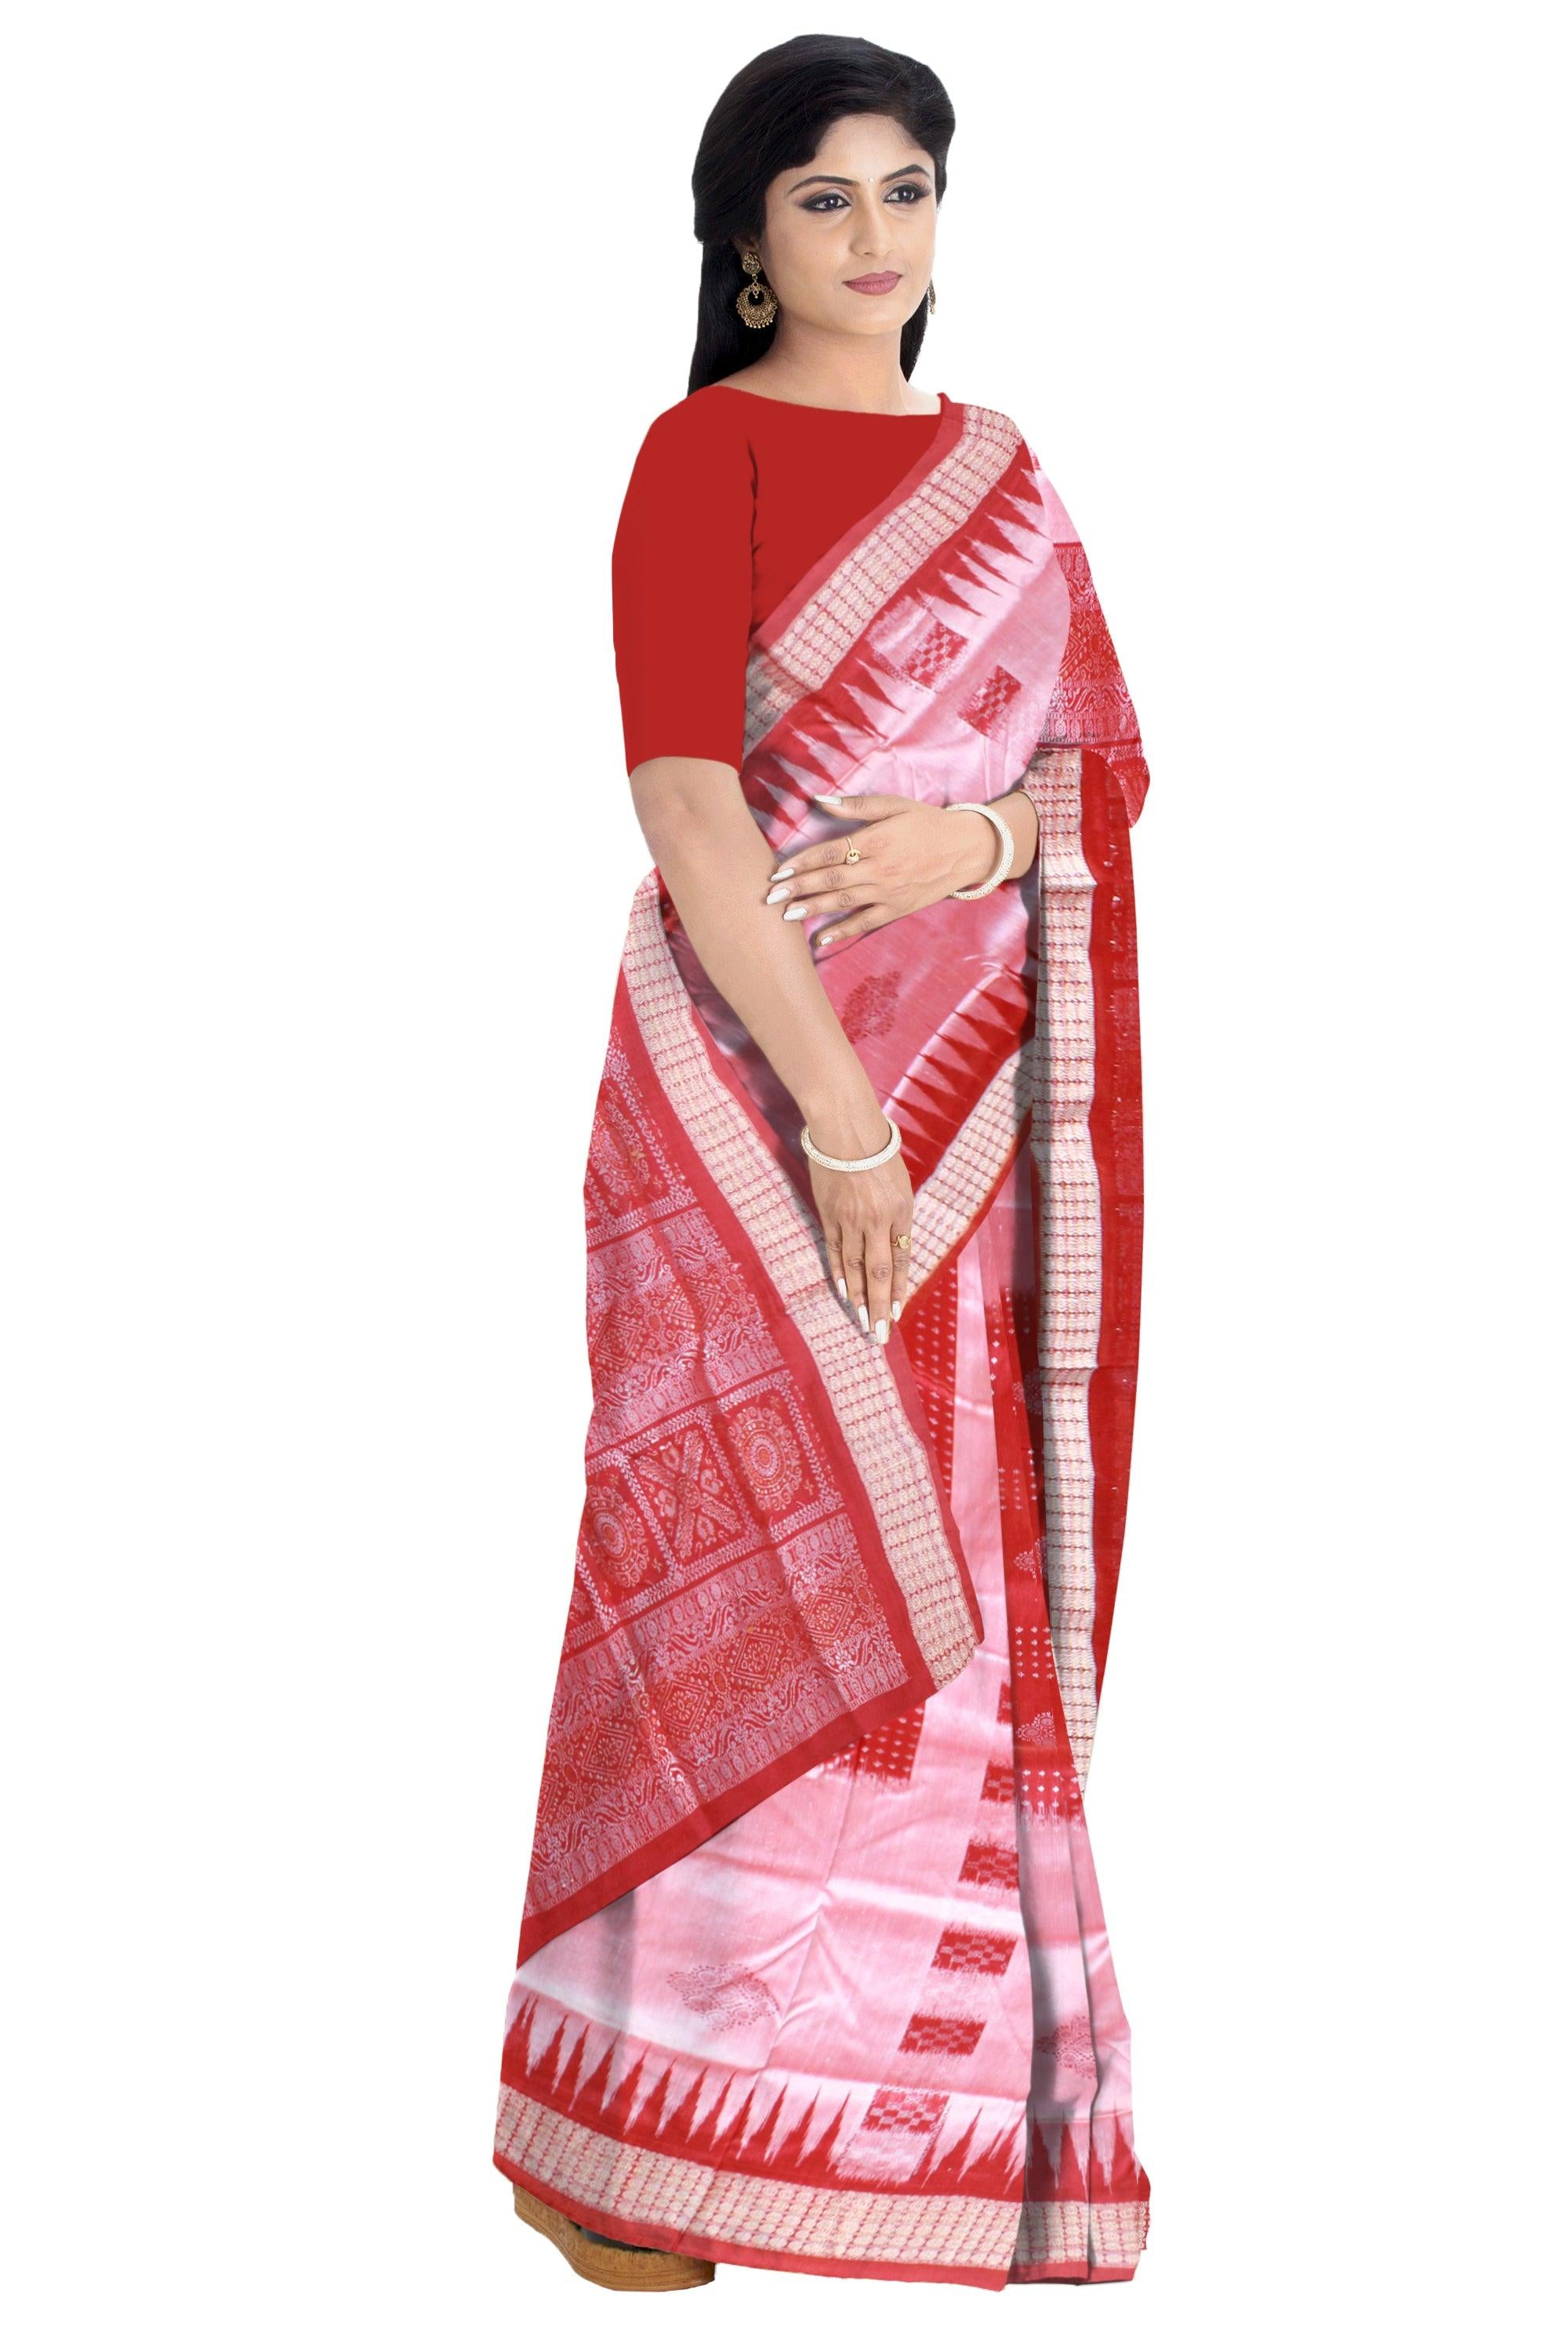 NEW COLLECTION CHANDUA PATA SAREE IS RED AND LIGHT SILVER COLOR BASE, WITH BLOUSE PIECE. - Koshali Arts & Crafts Enterprise